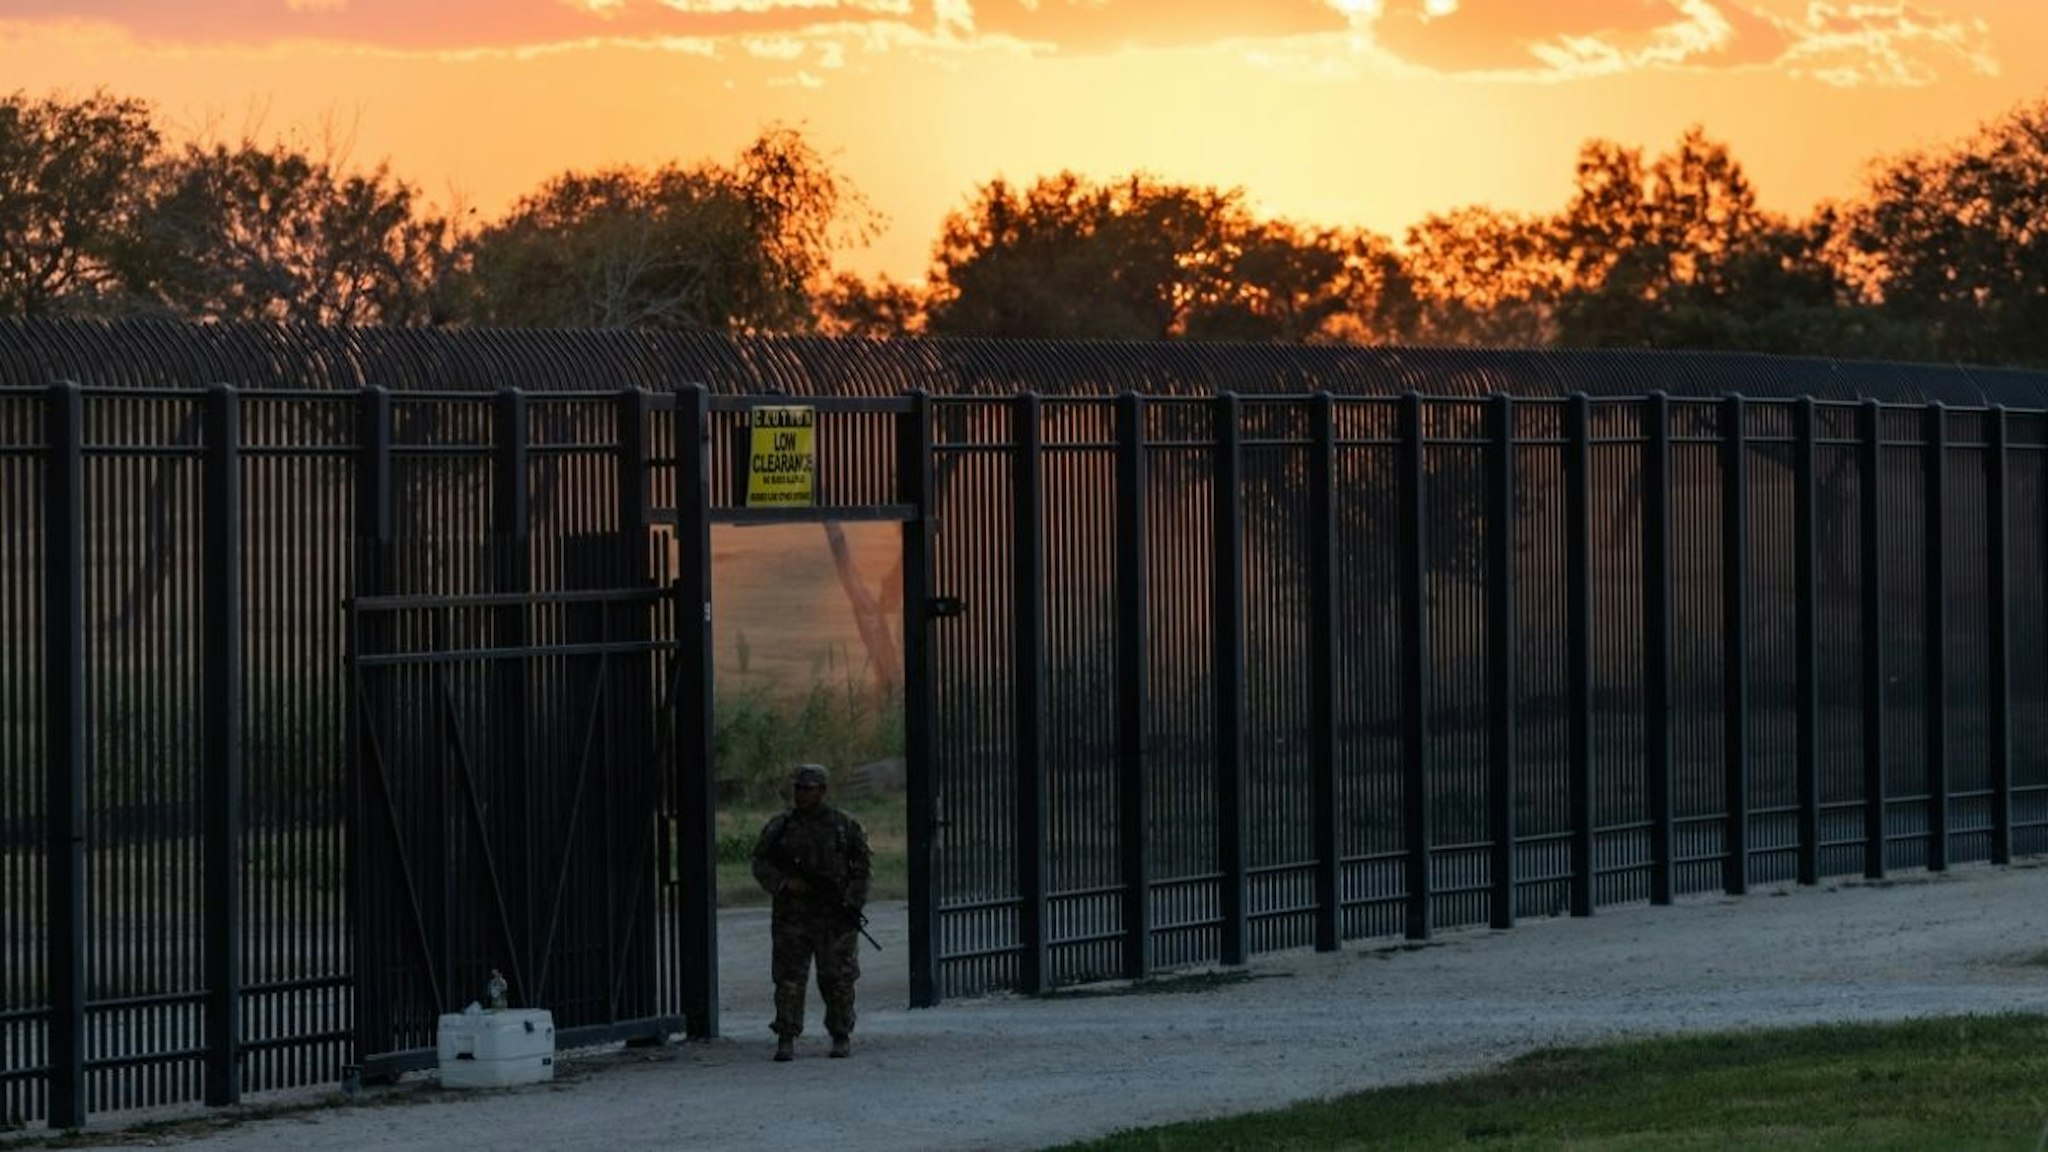 A Texas Army National Guard member guards an opening in the border wall near a makeshift migrant encampment where thousands of migrants have gathered, causing U.S. Customs and Border Protection to close the point of entry between the U.S. and Mexico in response to an influx of immigrants on September 17, 2021 in Del Rio, Texas.